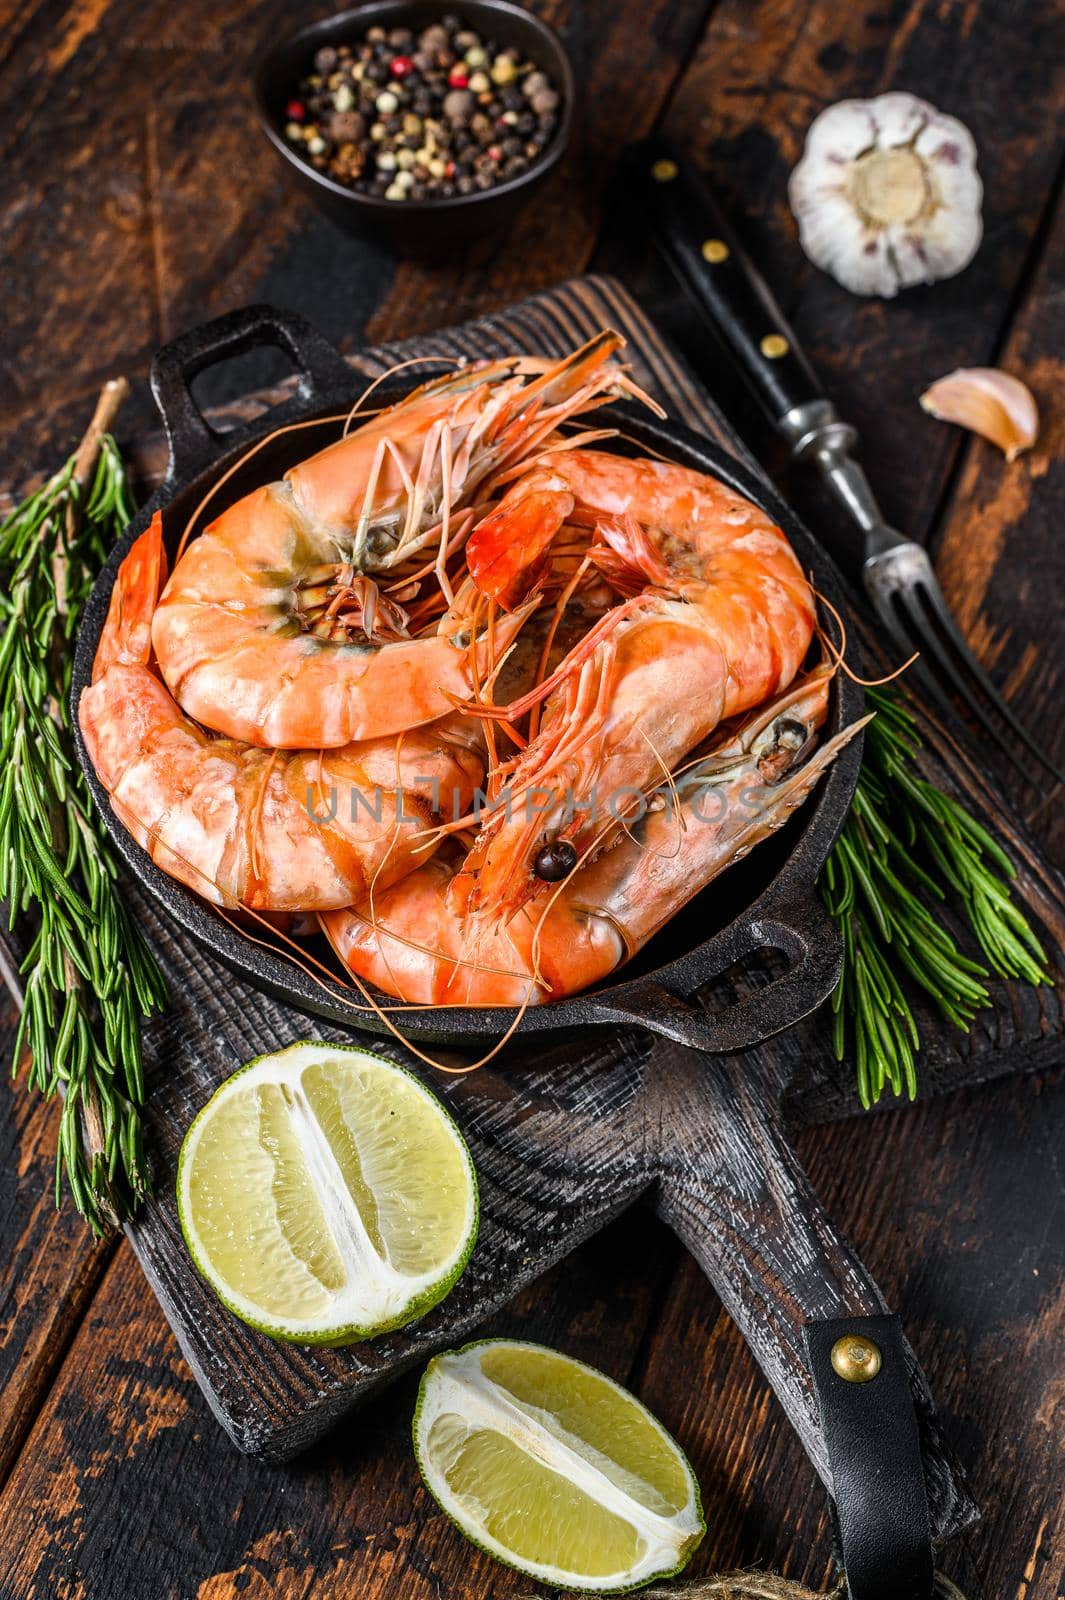 Red Tiger shrimps Prawns in a pan. Dark wooden background. Top view by Composter